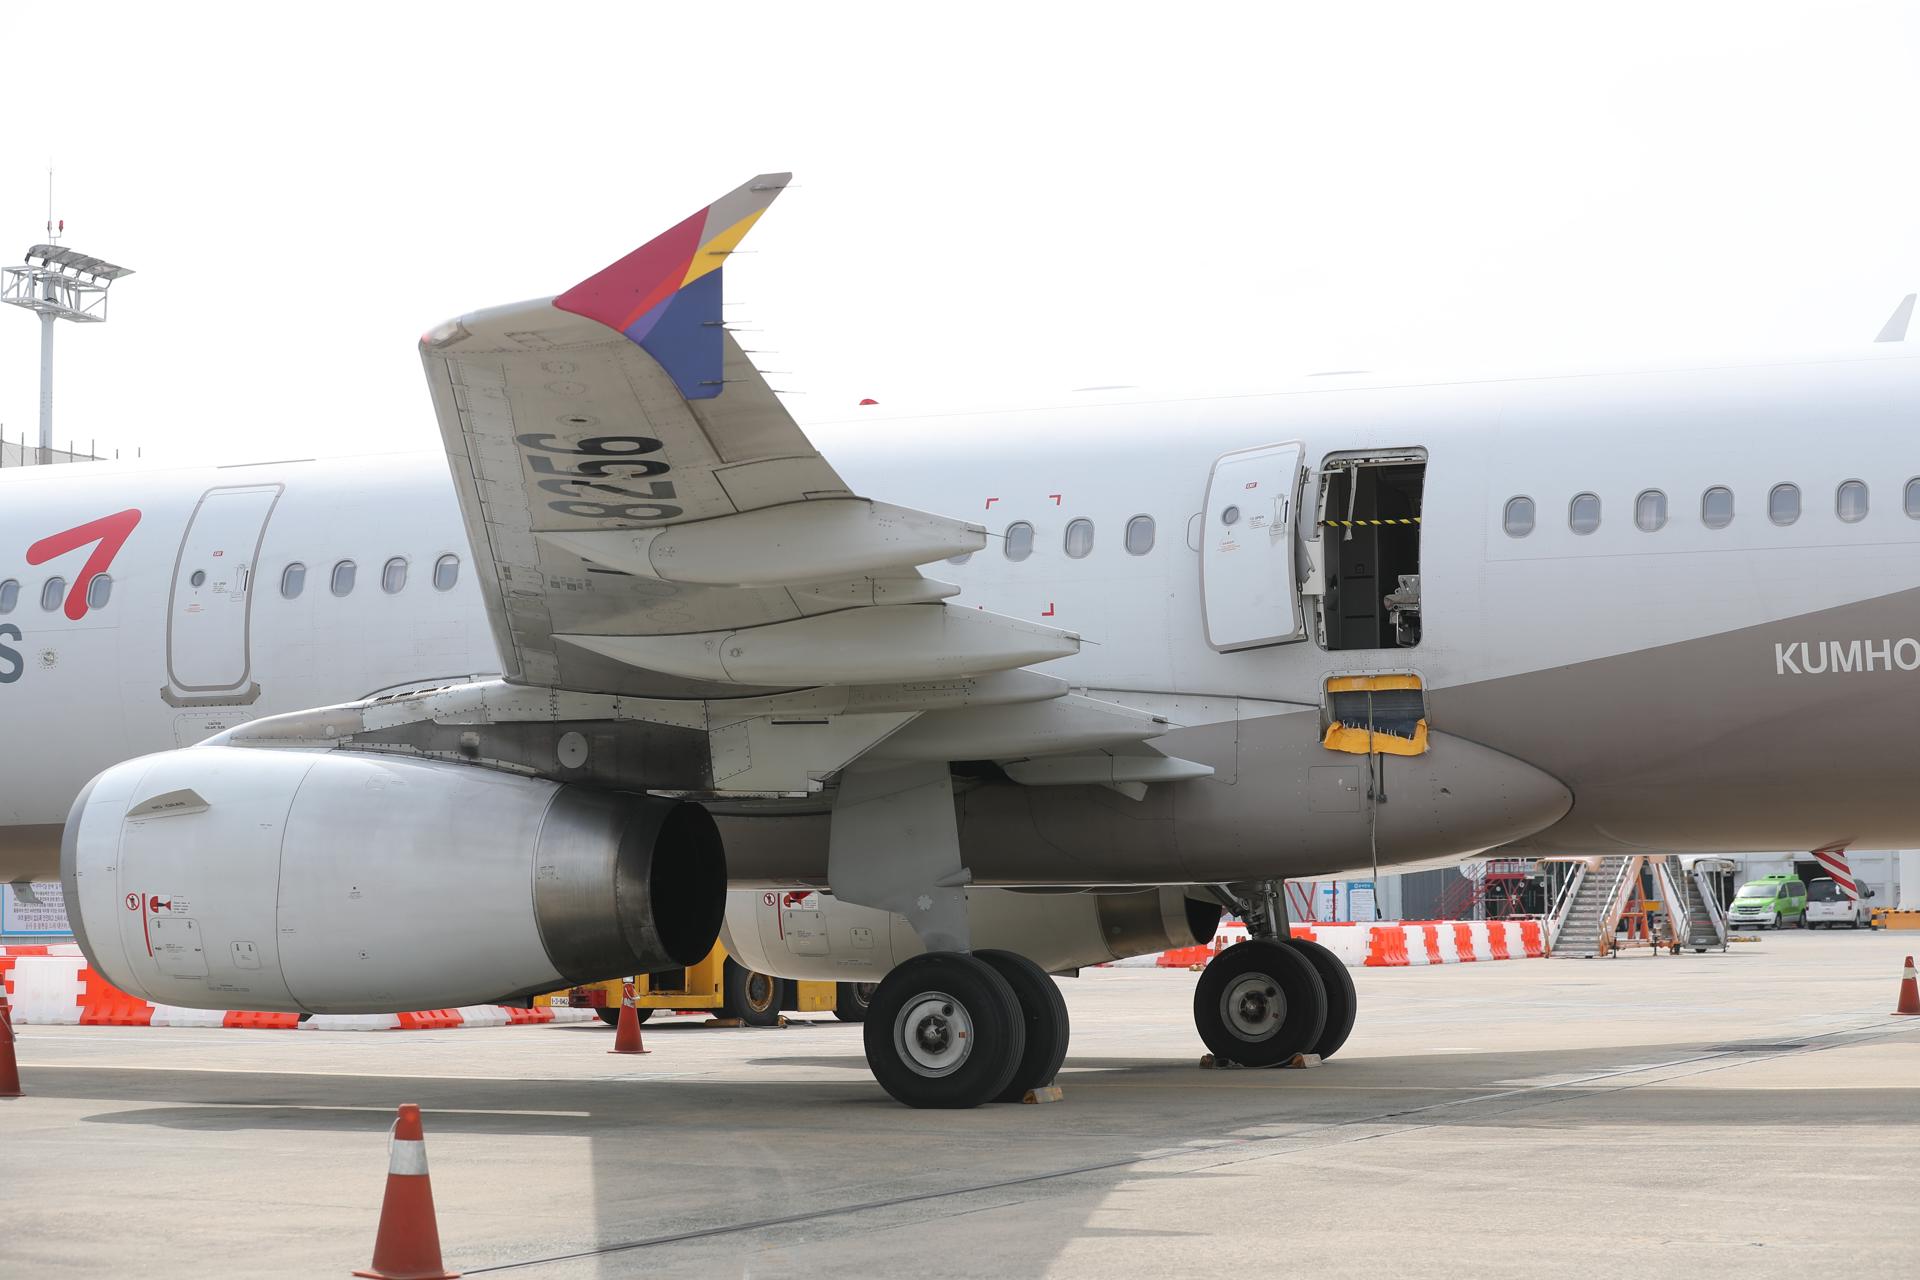 An Asiana Airlines plane is parked after an emergency landing at Daegu International Airport, 237 kilometers southeast of Seoul, South Korea, 26 May 2023. EFE/EPA/YONHAP SOUTH KOREA OUT